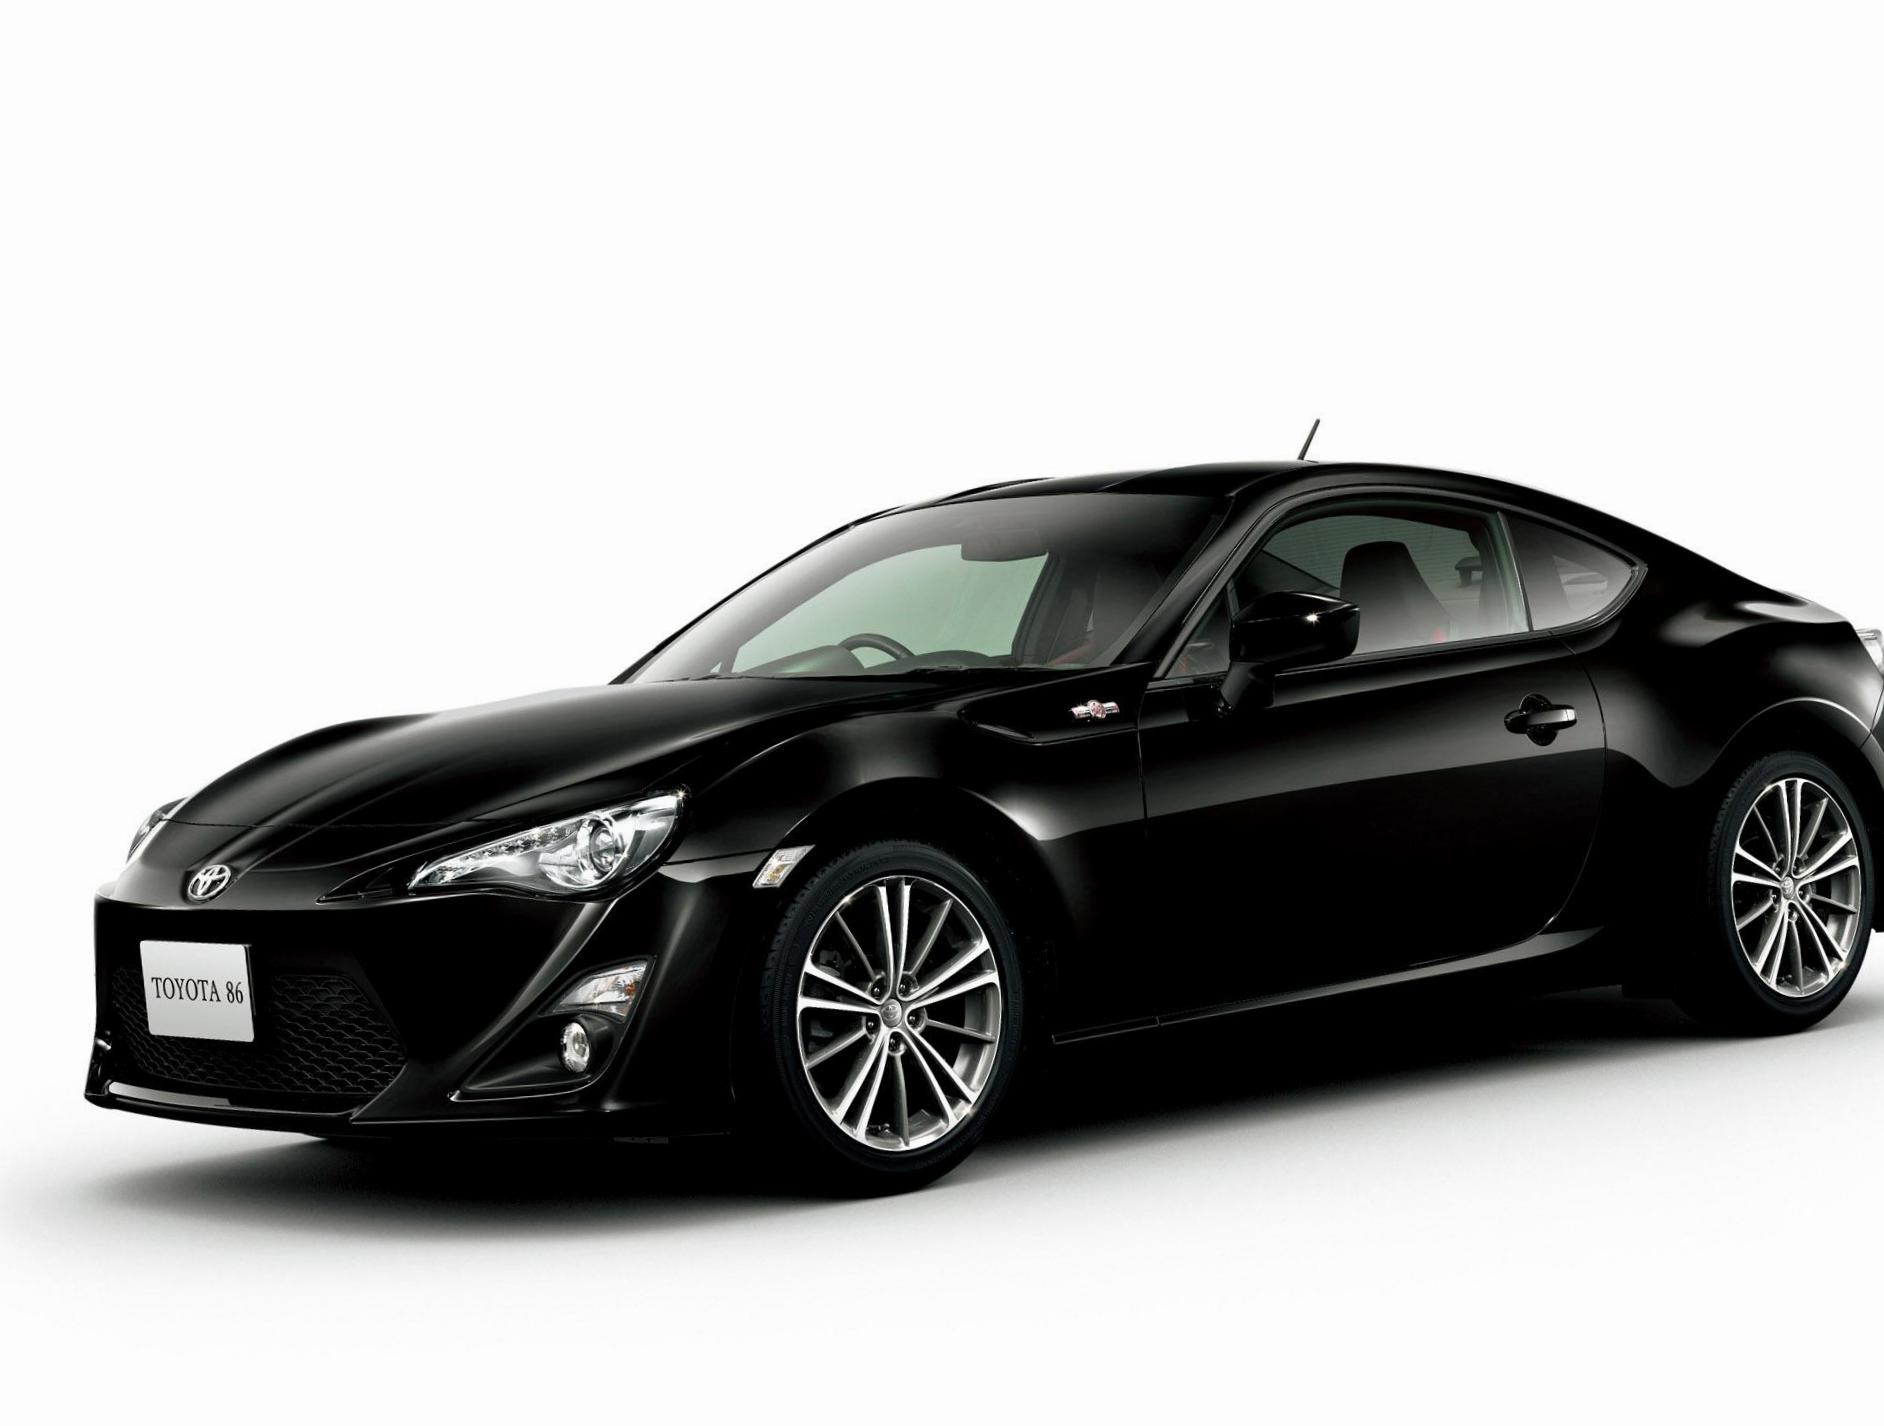 GT 86 Toyota review 2012